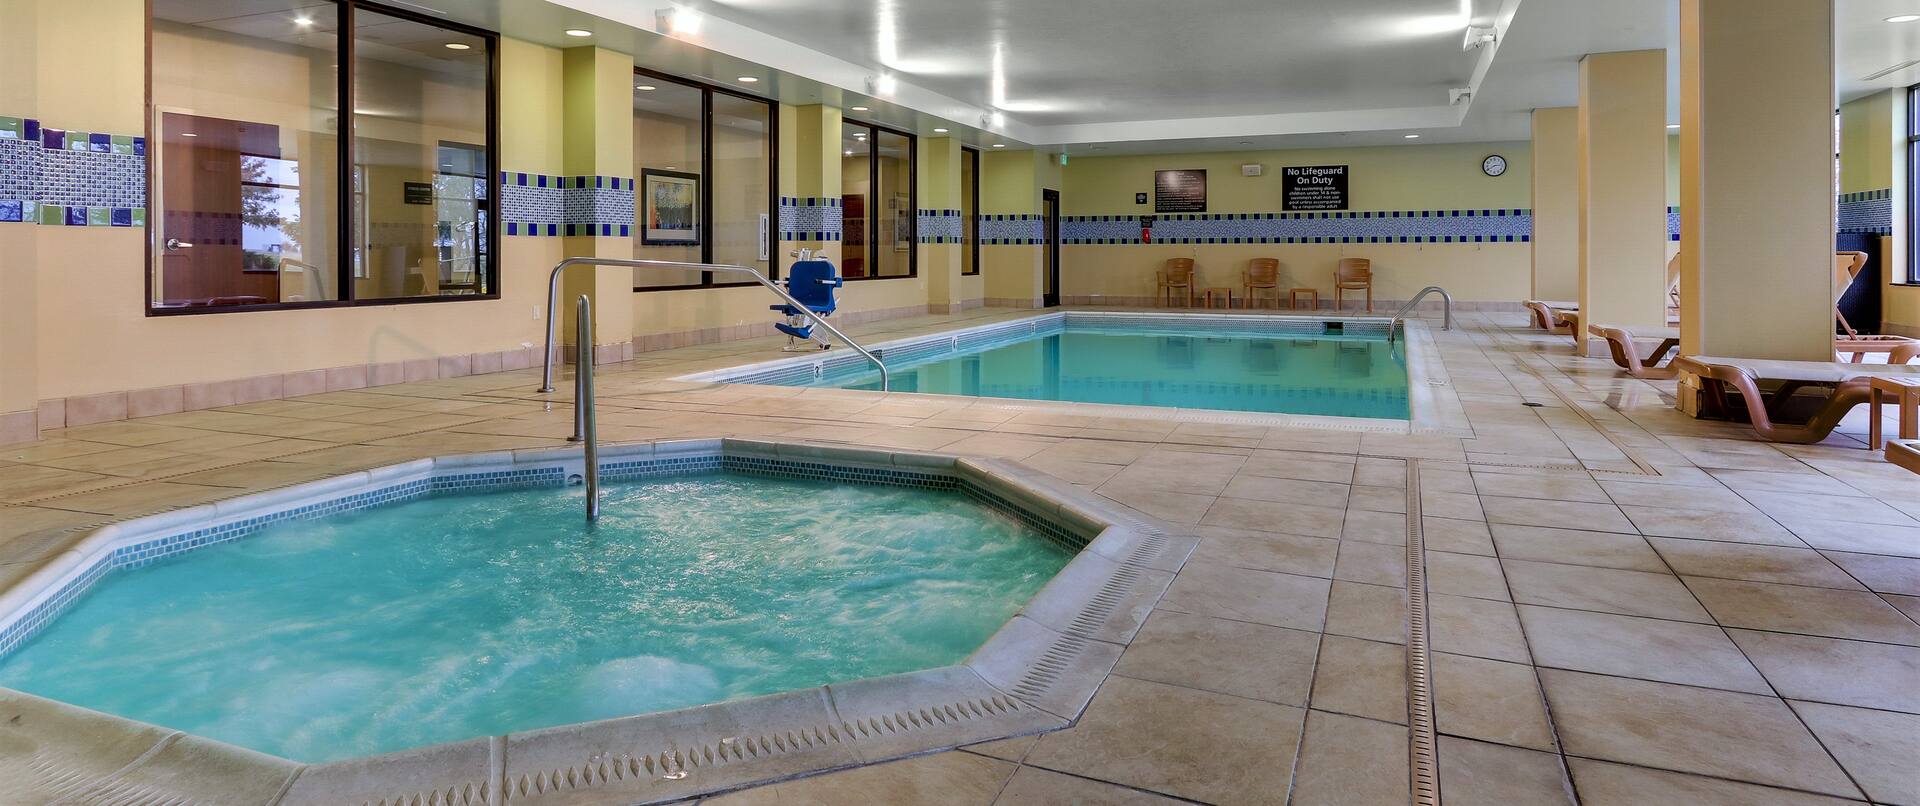 Indoor Pool and whirlpool